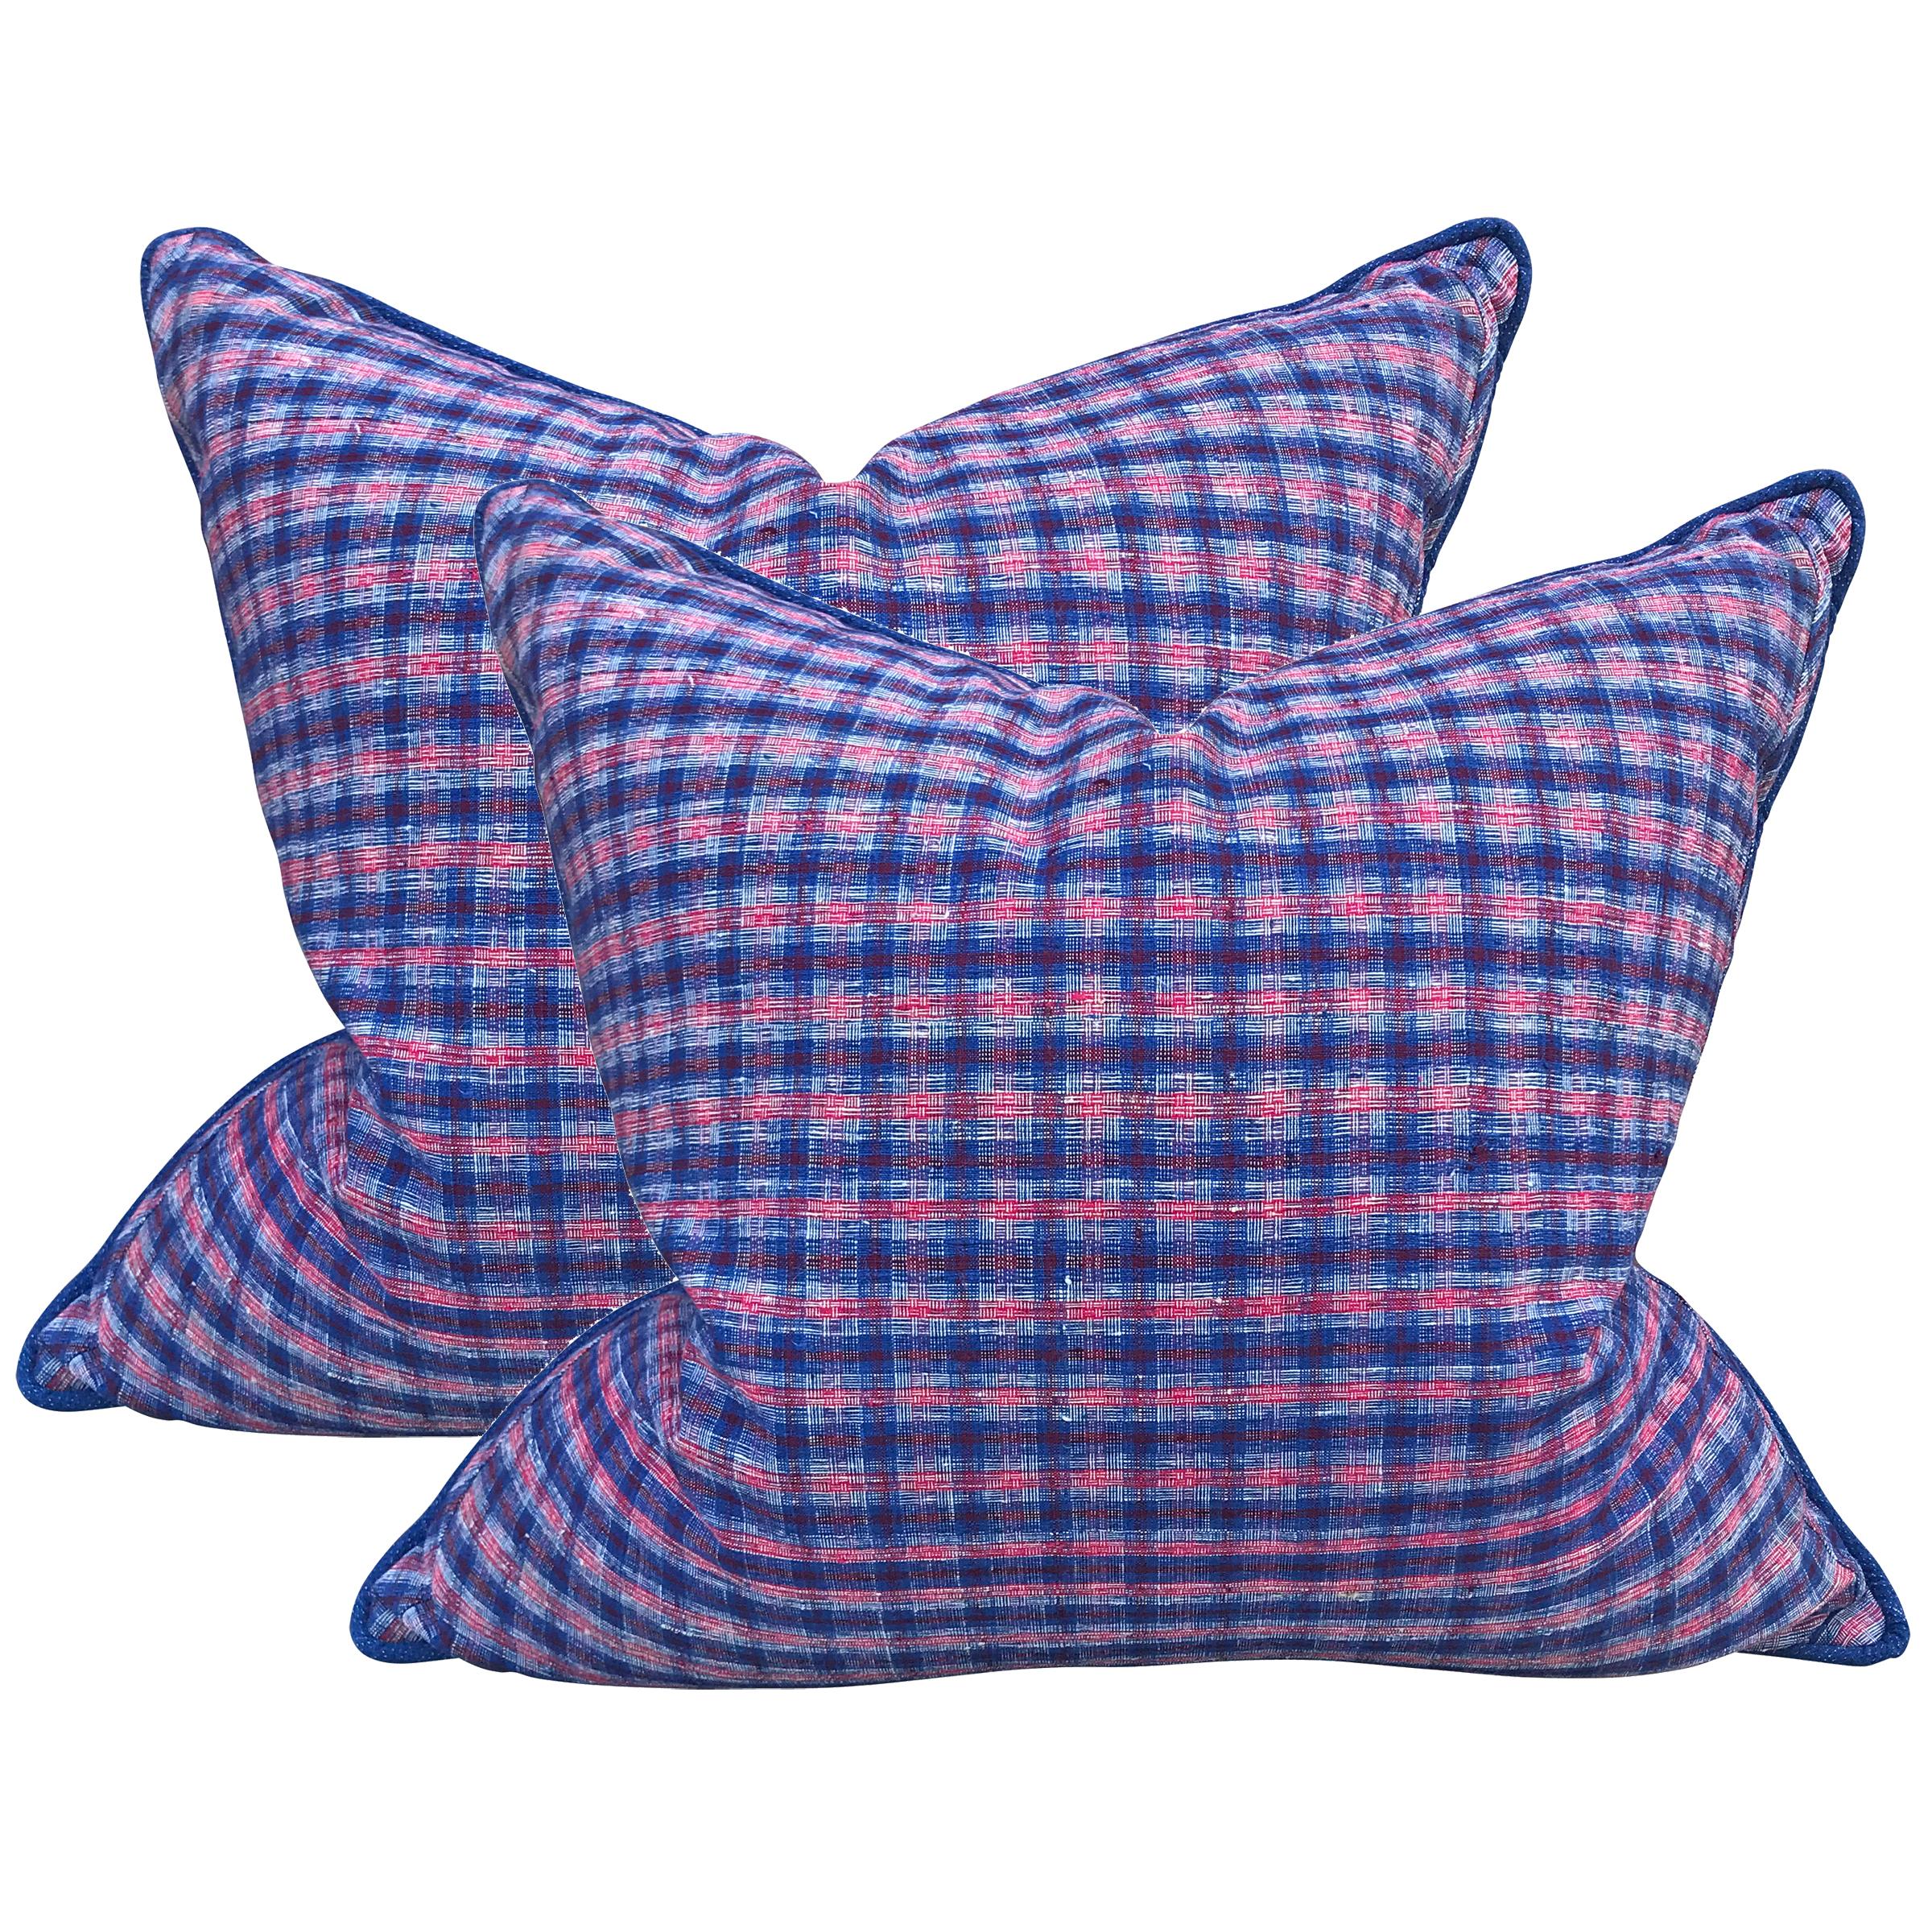 Pair of Vintage Chinese Cotton Plaid Pillows